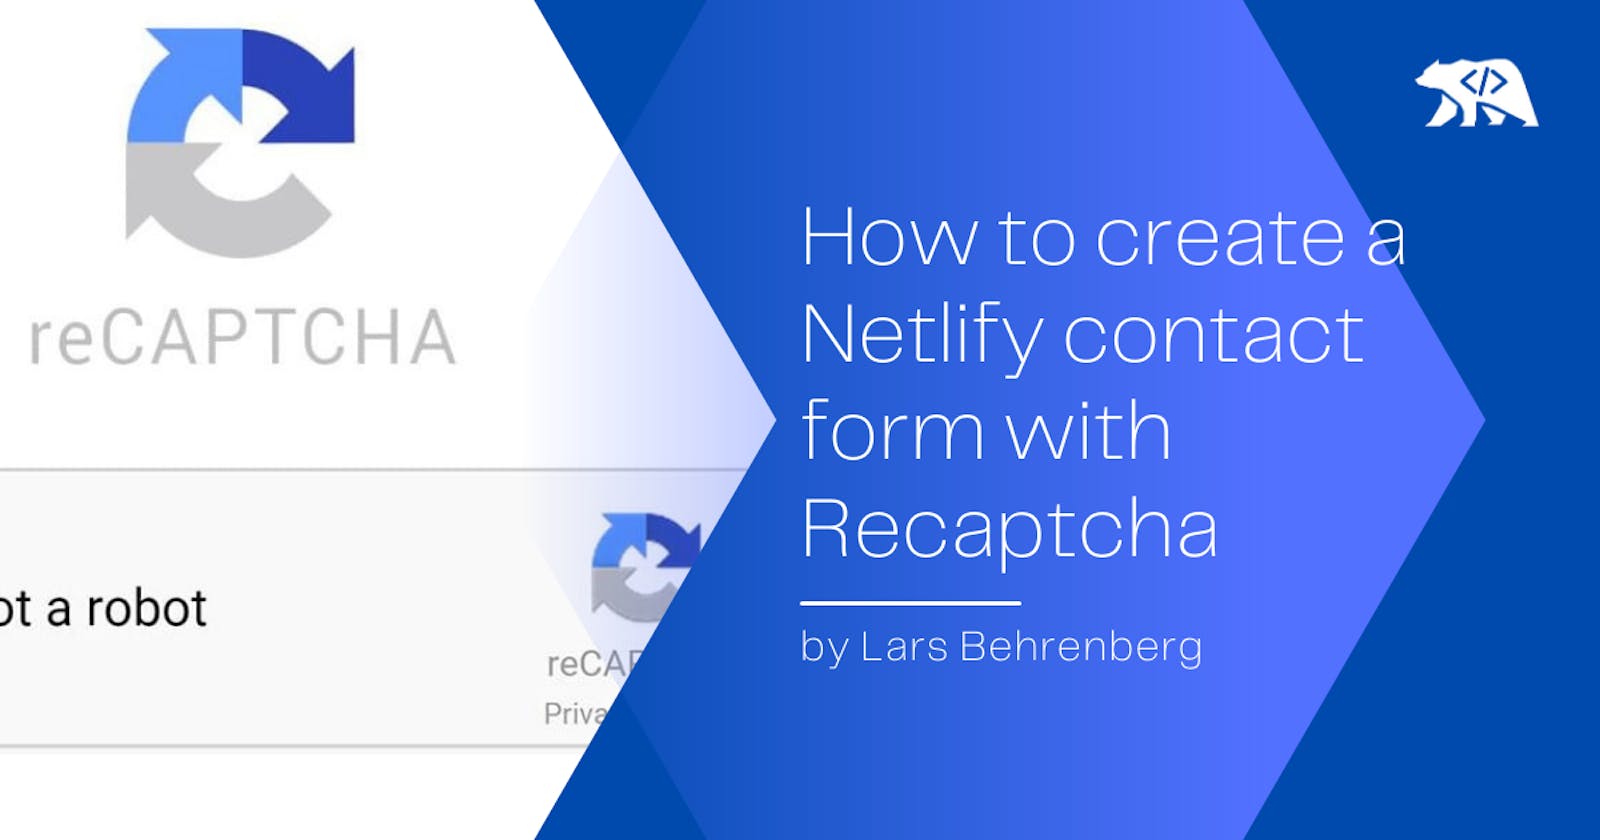 How to create a Contact Form with Recaptcha hosted on Netlify